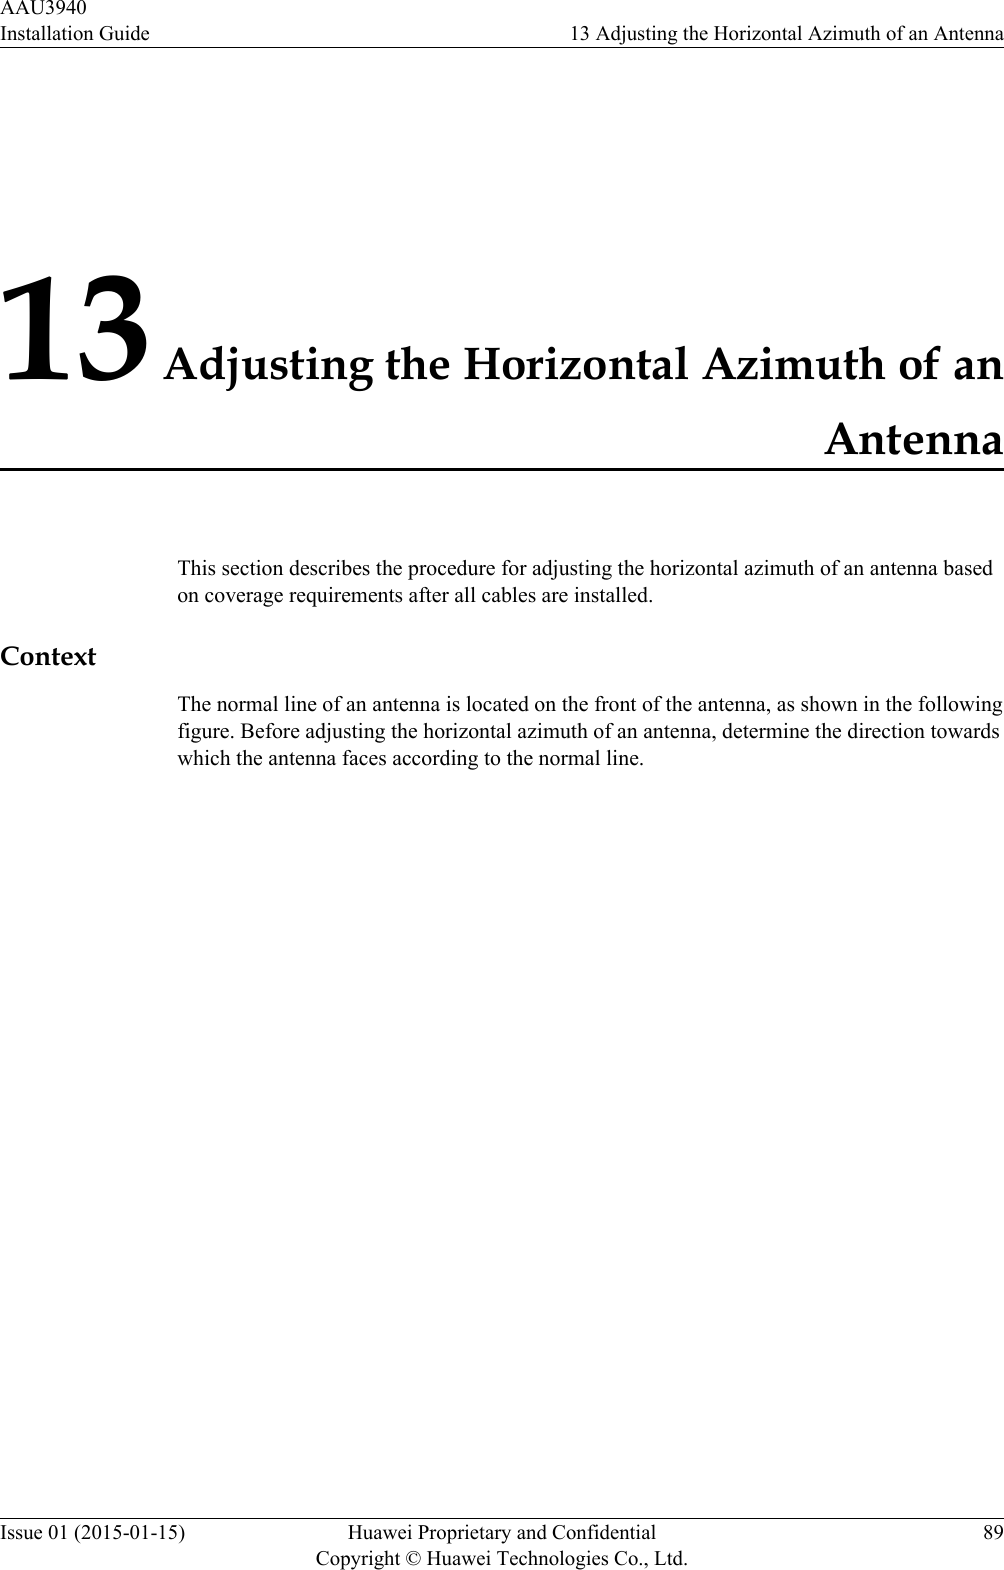 13 Adjusting the Horizontal Azimuth of anAntennaThis section describes the procedure for adjusting the horizontal azimuth of an antenna basedon coverage requirements after all cables are installed.ContextThe normal line of an antenna is located on the front of the antenna, as shown in the followingfigure. Before adjusting the horizontal azimuth of an antenna, determine the direction towardswhich the antenna faces according to the normal line.AAU3940Installation Guide 13 Adjusting the Horizontal Azimuth of an AntennaIssue 01 (2015-01-15) Huawei Proprietary and ConfidentialCopyright © Huawei Technologies Co., Ltd.89